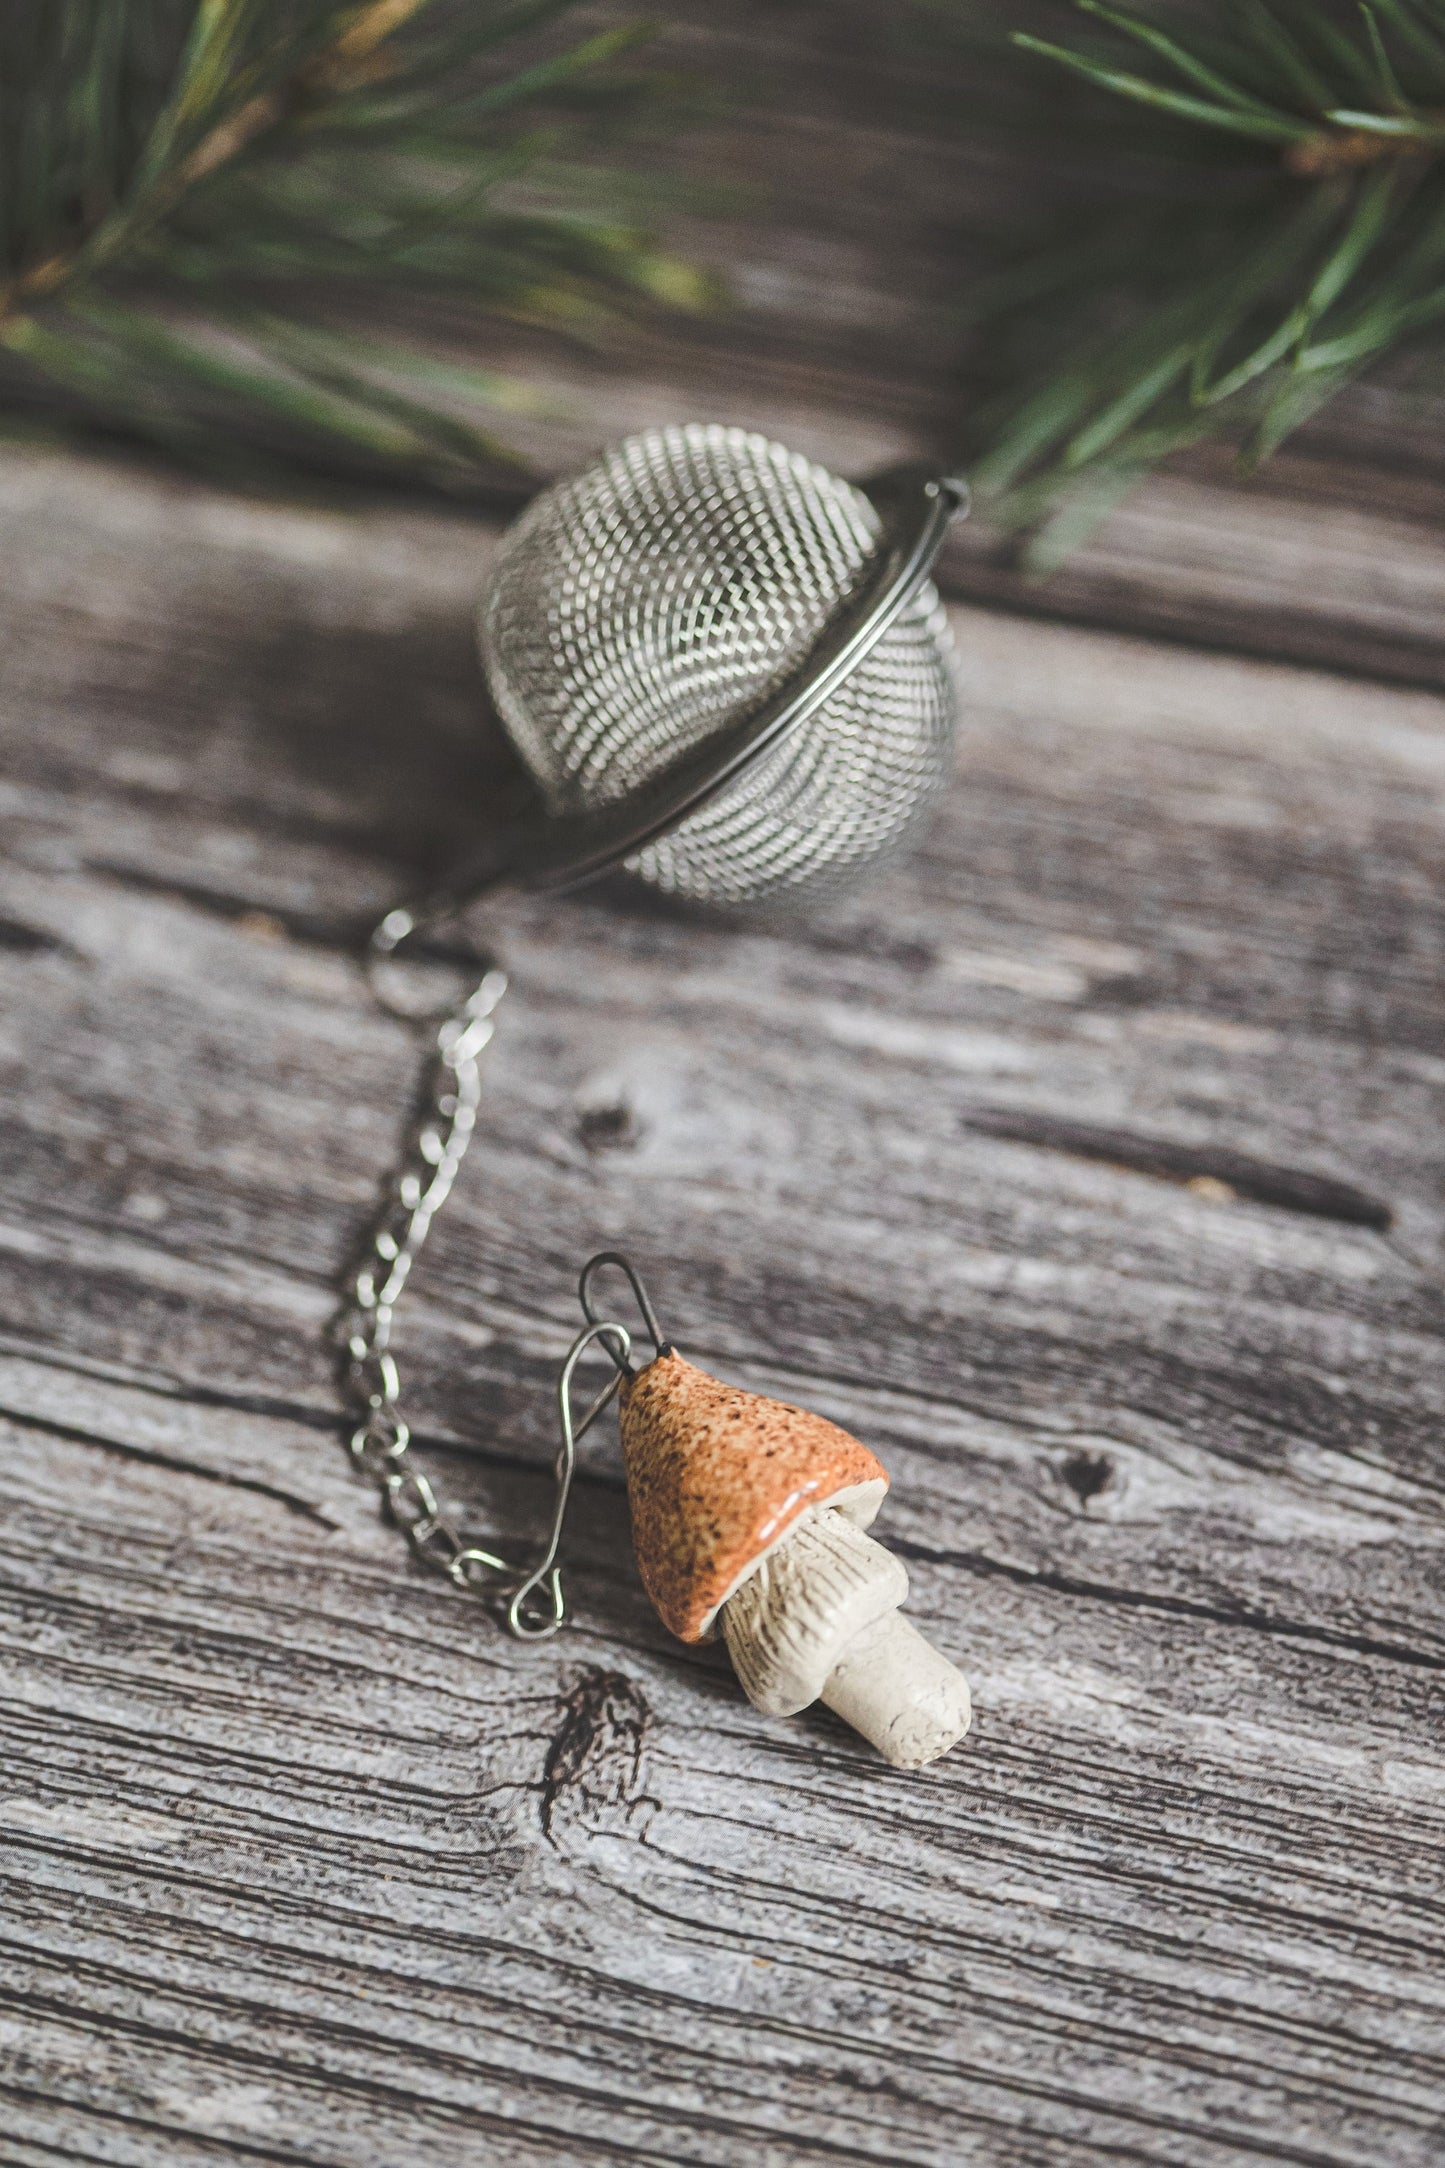 Loose leaf tea strainer with yellowish swamp mushroom - Mother's day gift - Herbal tea infuser with ceramic charm - Christmas gift